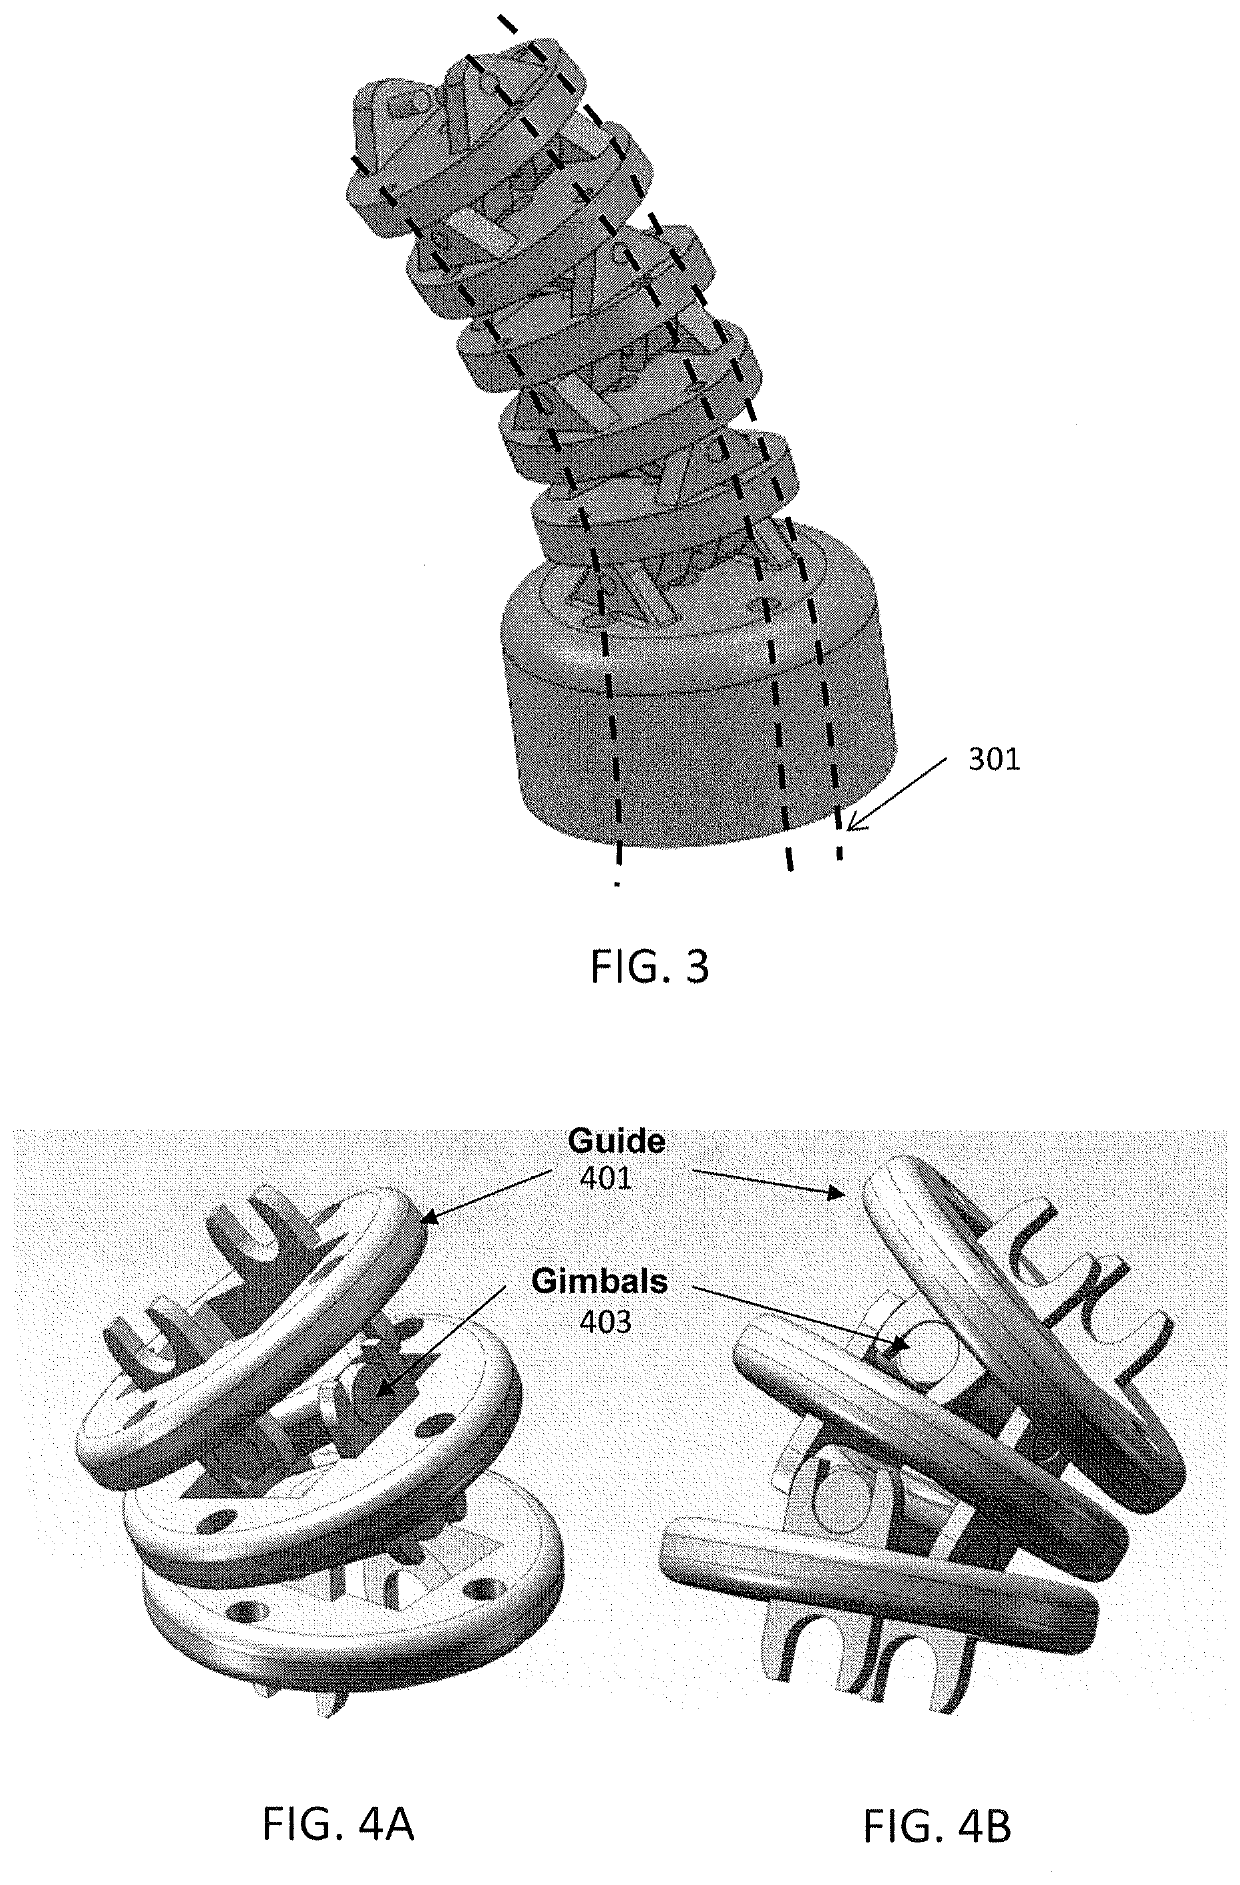 Medical devices having smoothly articulating multi-cluster joints